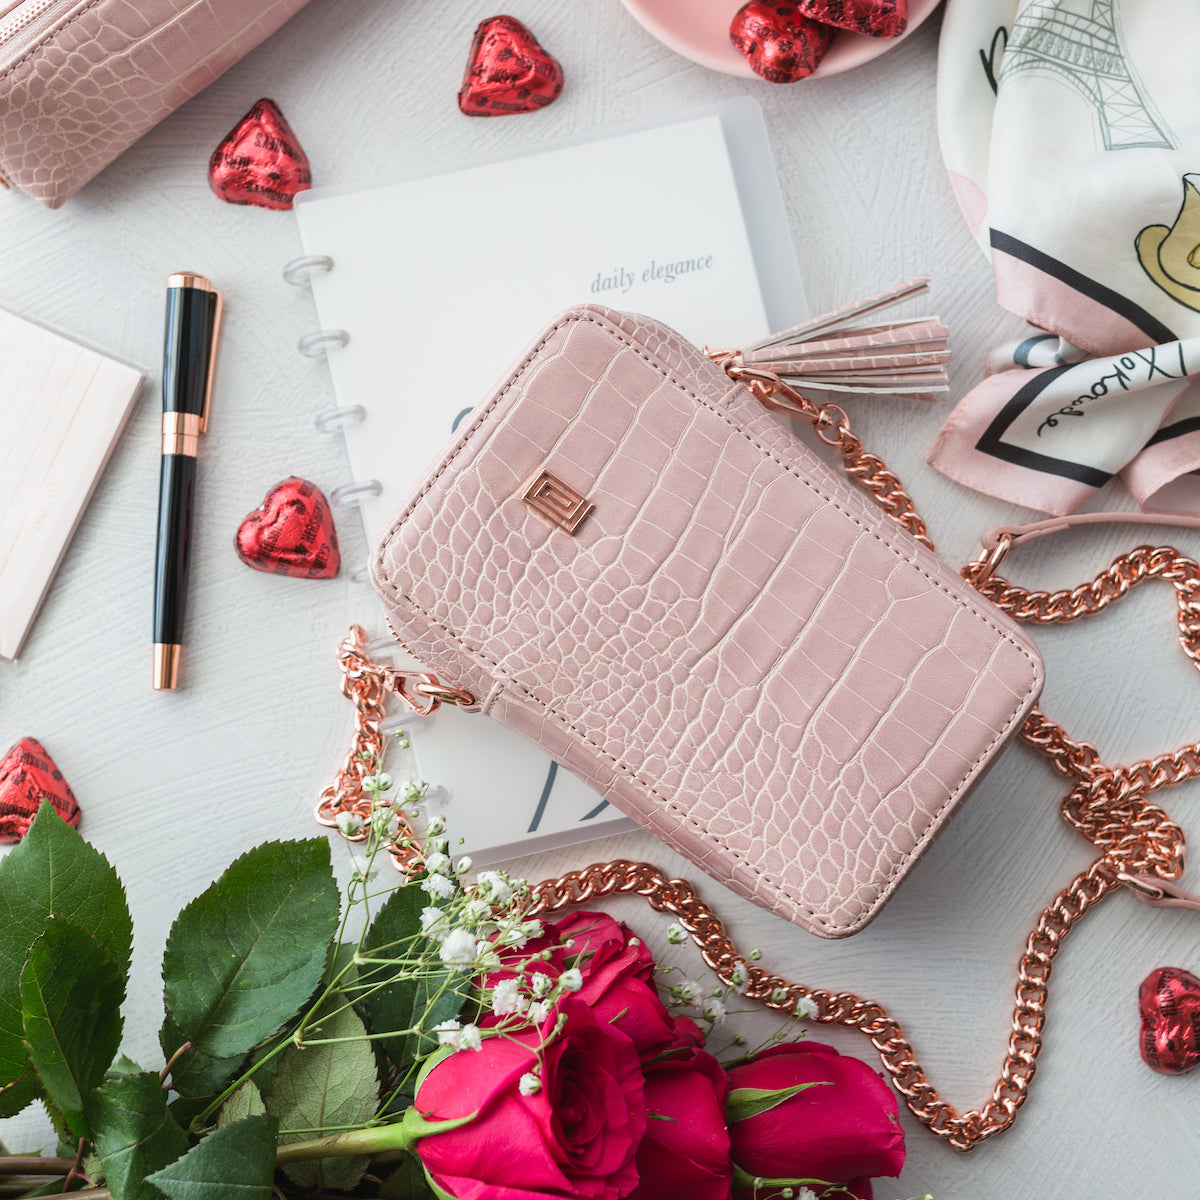 Vegan leather blush croco phone case with flowers and chocolates.